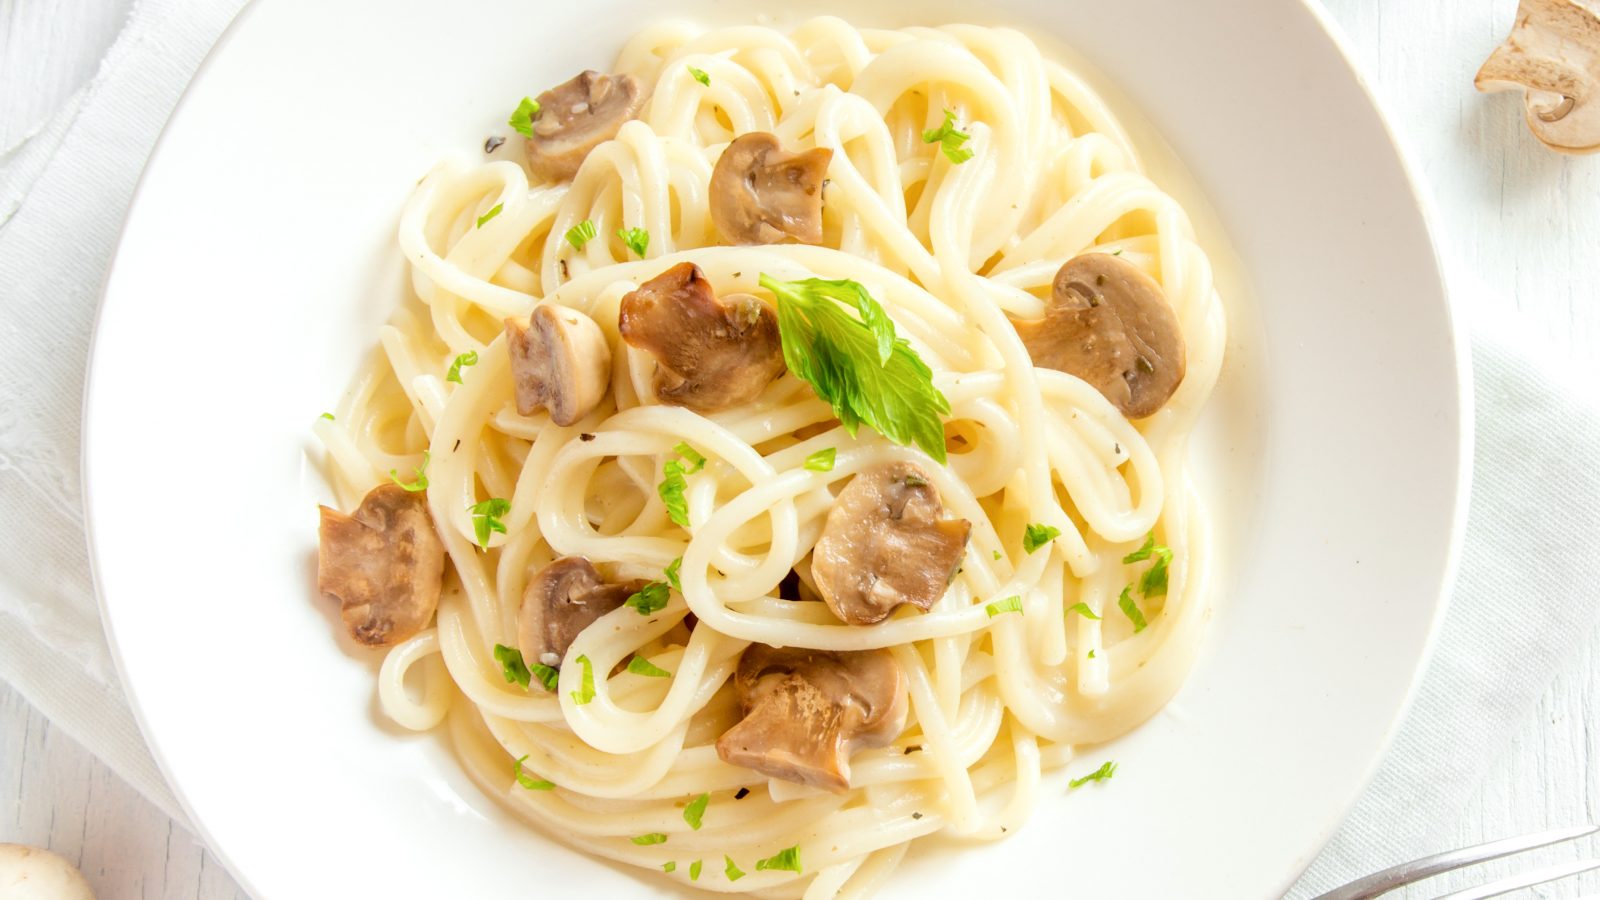 creamy mushroom pasta recipe in a bowl from above with parsley as garnish